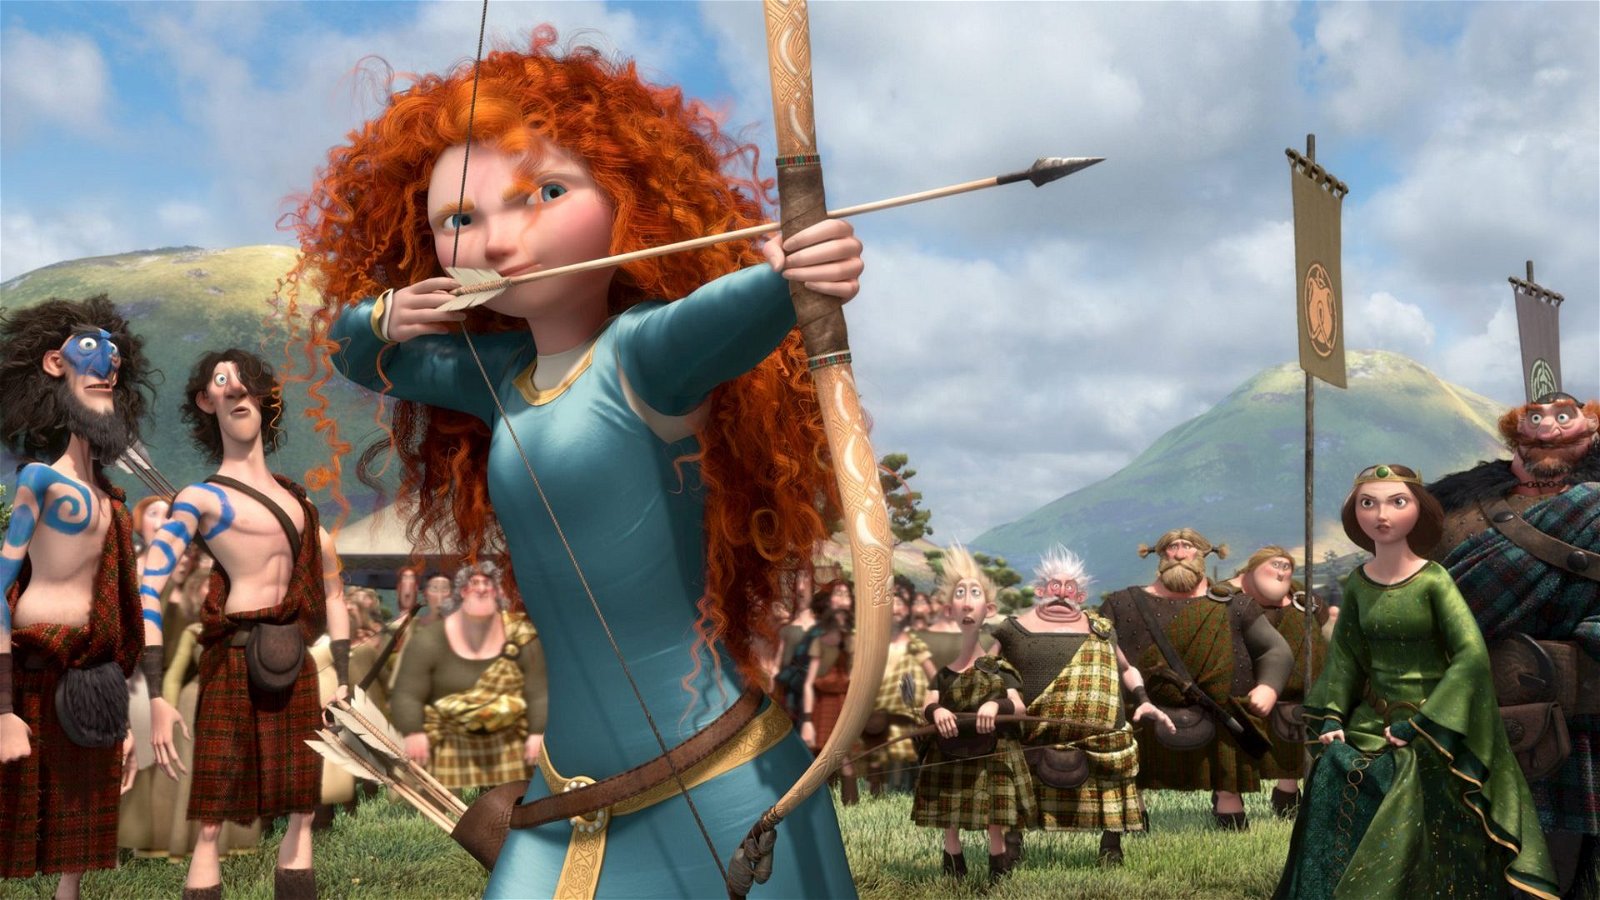 Brave (2012) Review